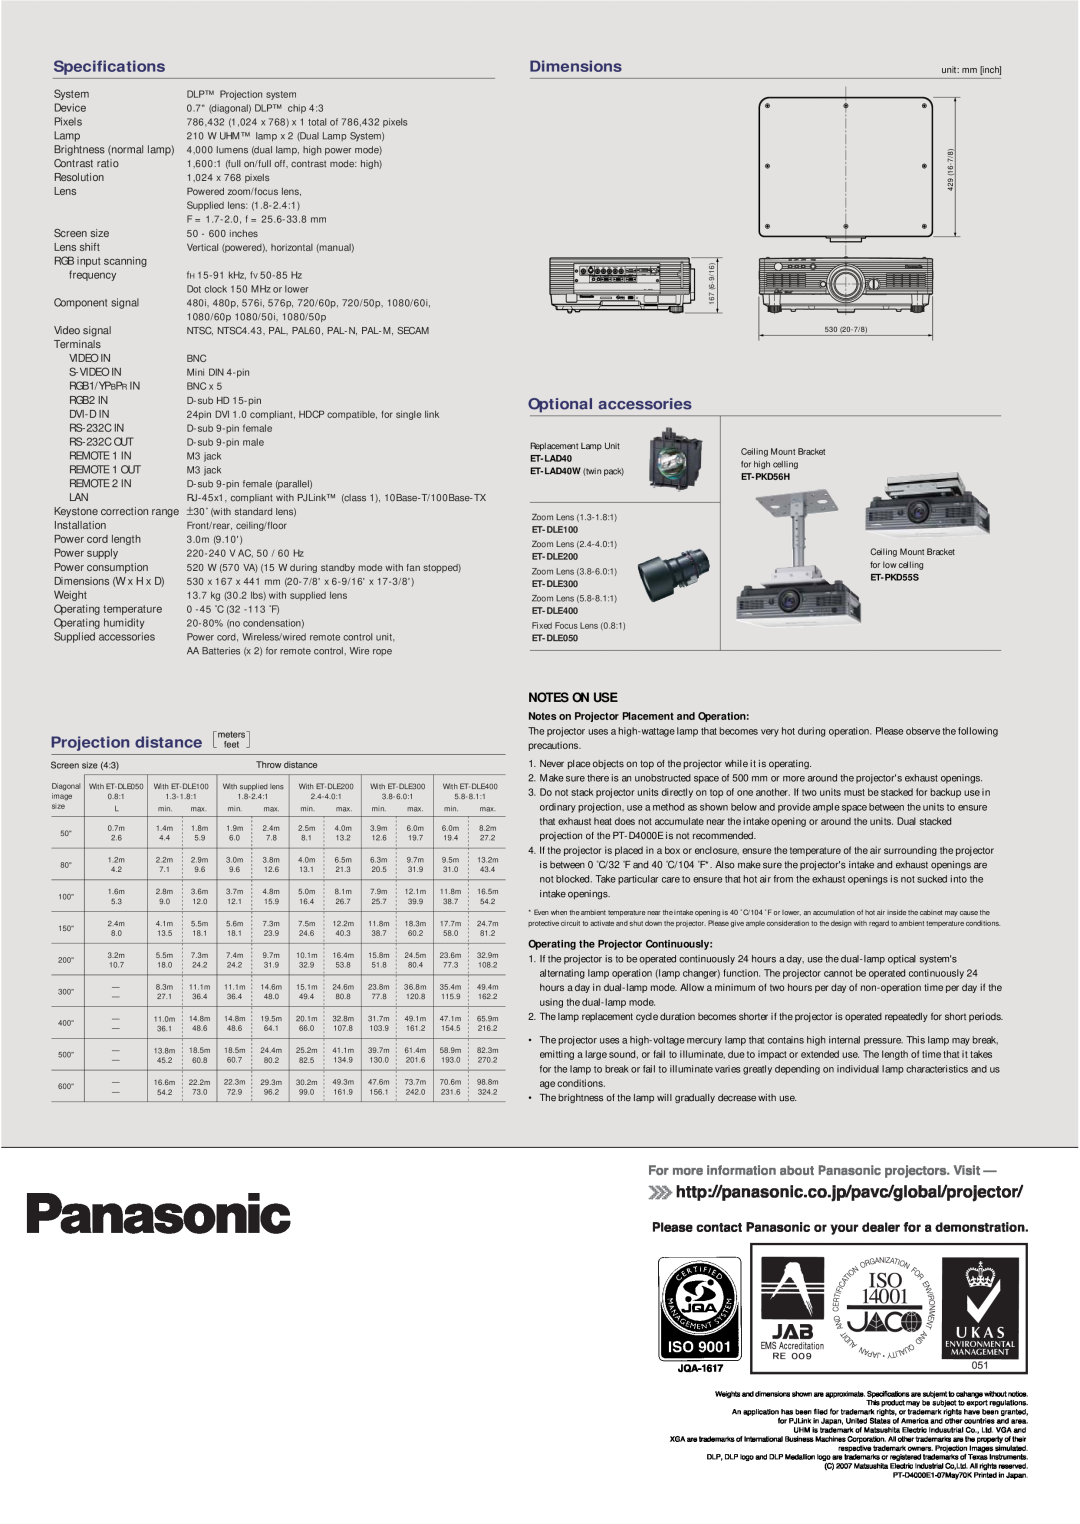 Panasonic PT-D4000E manual Specifications, Dimensions, Optional accessories, distance, Notes On Use 